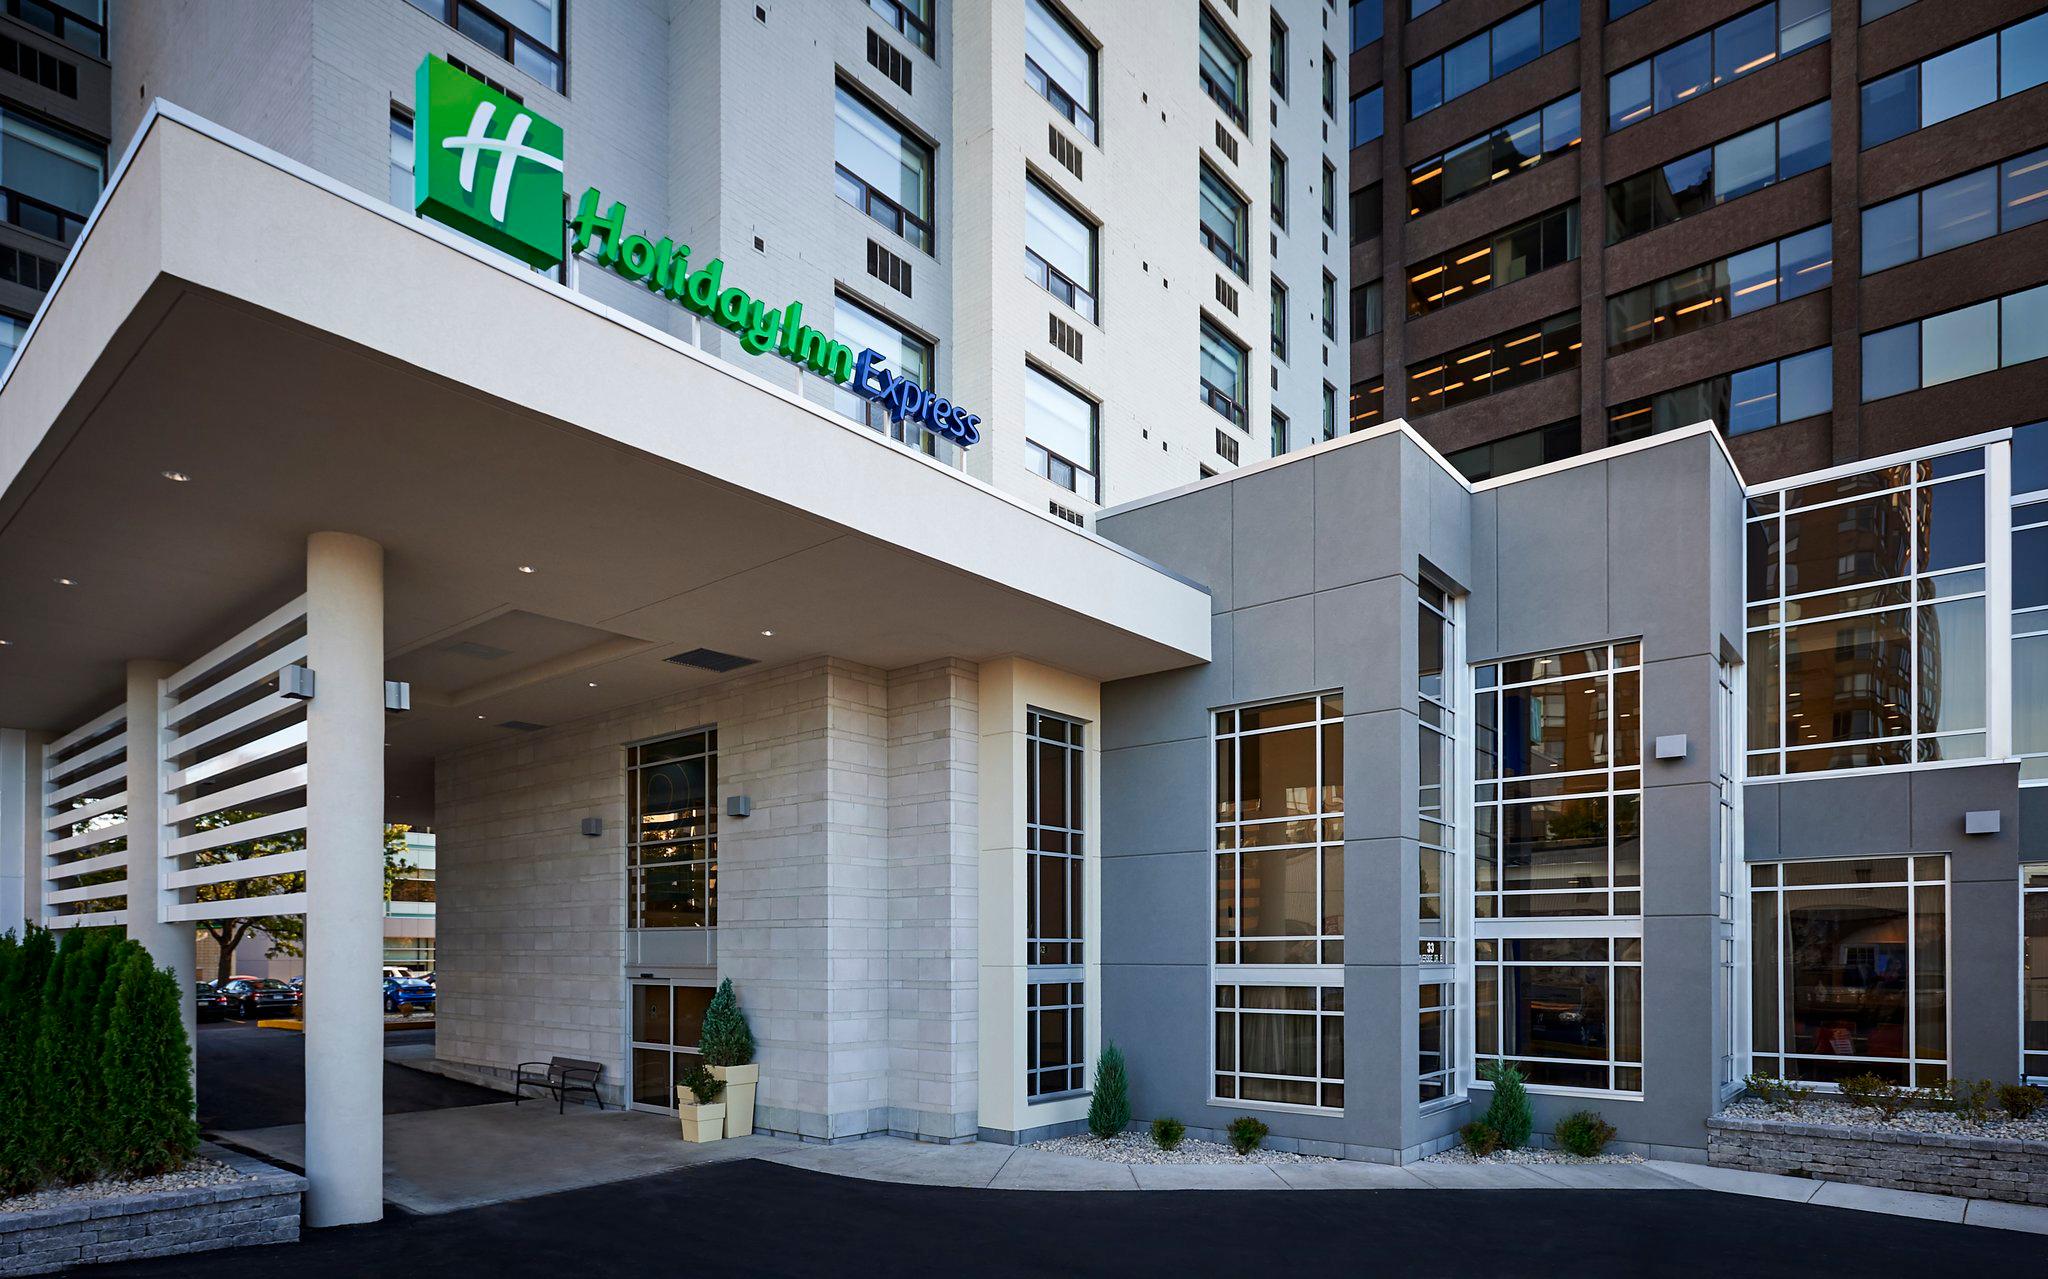 Holiday Inn Express Windsor Waterfront, an IHG Hotel in Windsor